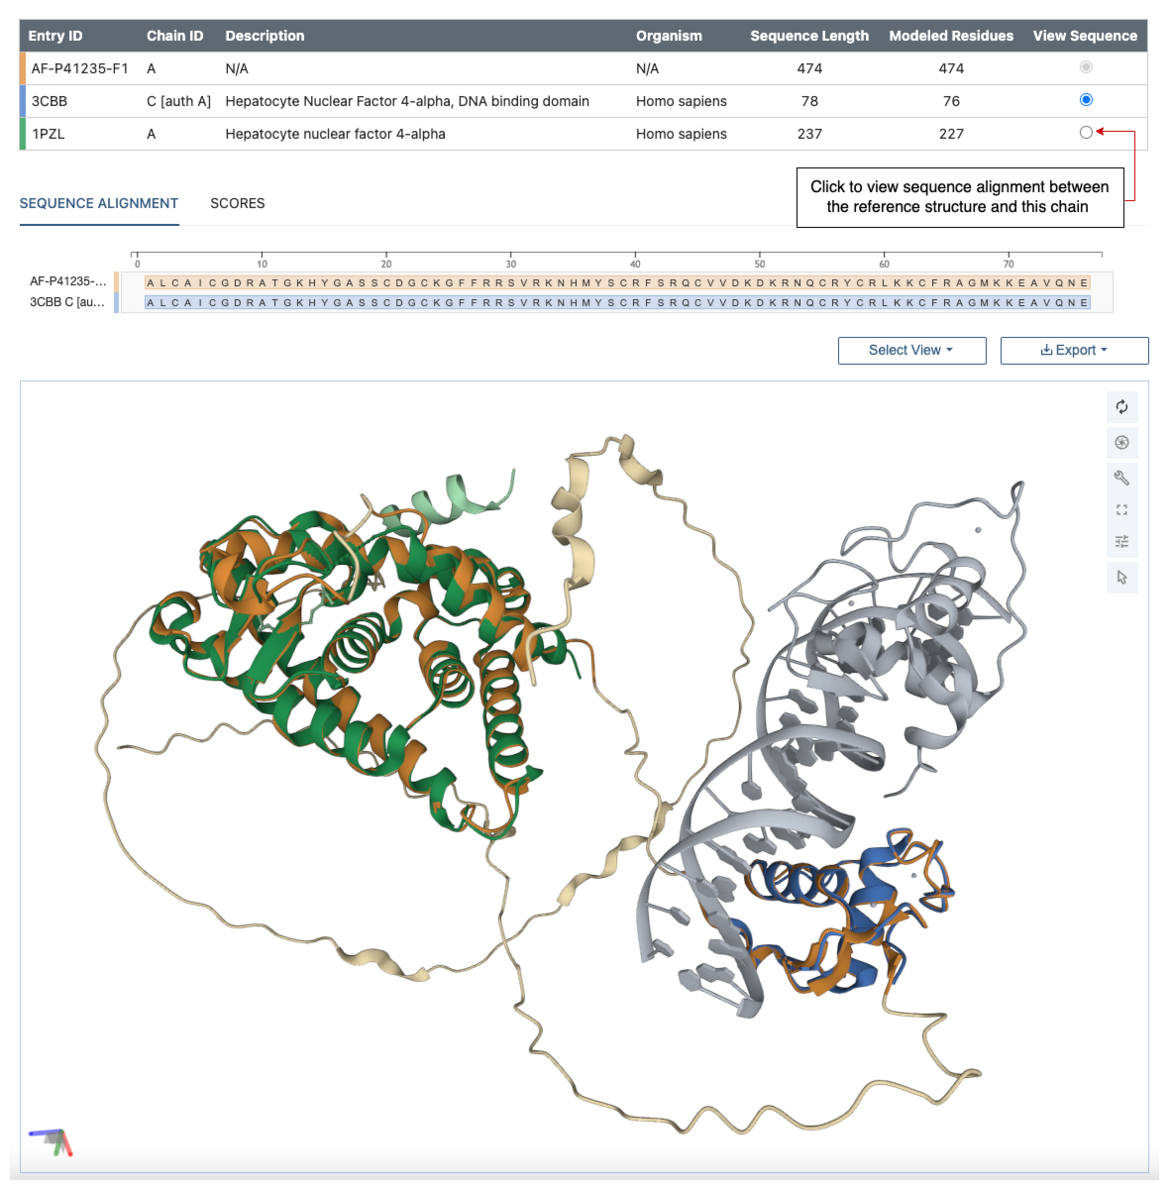 AlphaFold model of human Hepatocyte nuclear factor 4-alpha (AF-Q8W3K0-F1, in orange); Crystal structure of human HNF4α DNA binding domain in complex with DNA target (3CBB C[auth A], in blue); Complex of HNF-4α bound to fatty acid ligand and SRC-1 coactivator peptide (1PZL A, in green)